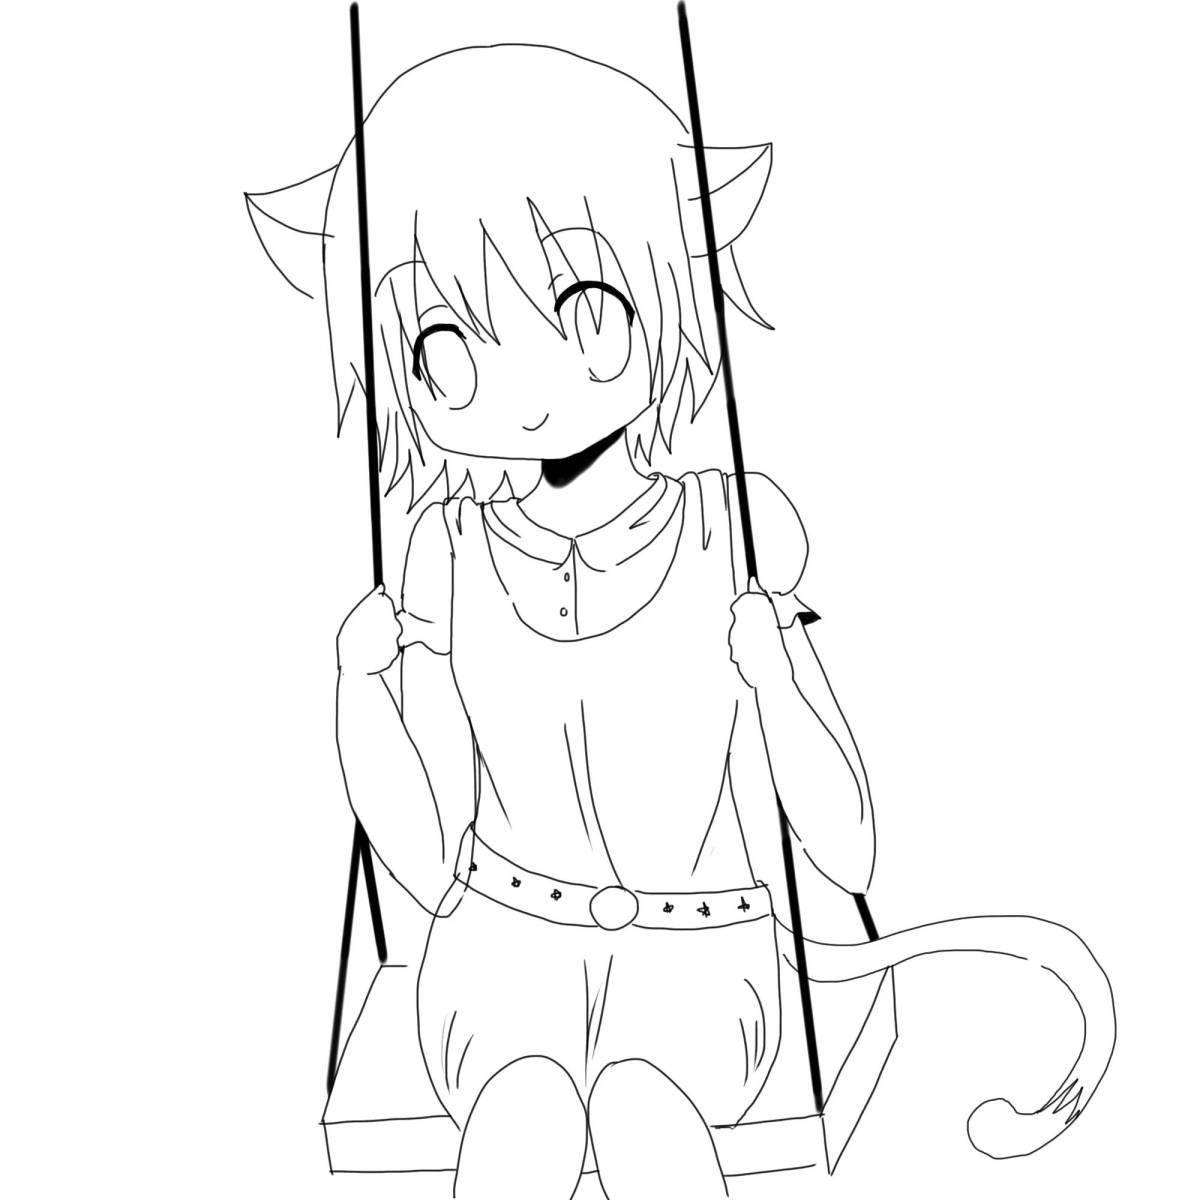 Anime people coloring page